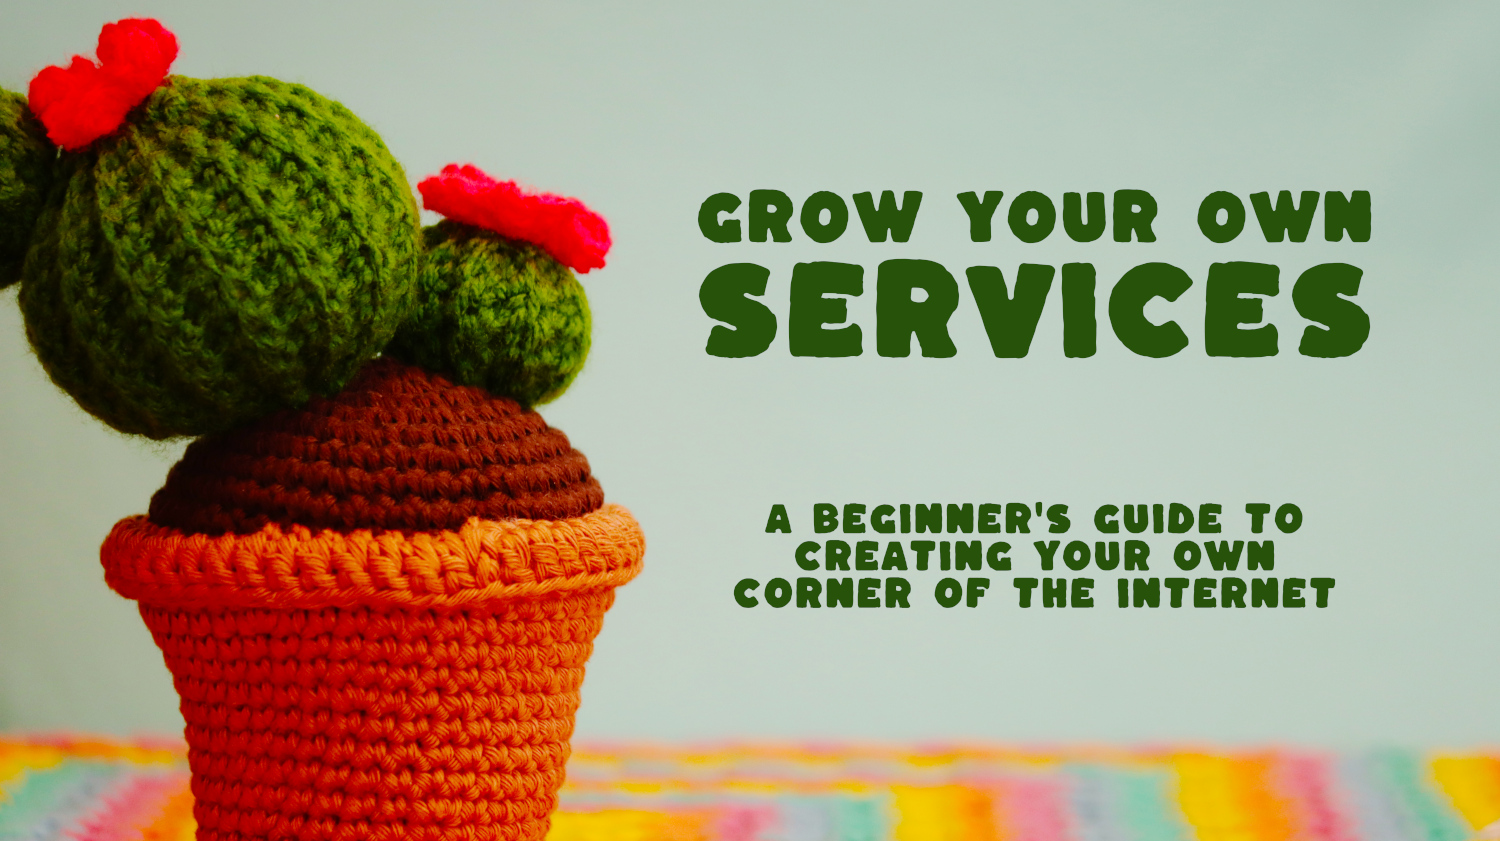 Grow Your Own Services